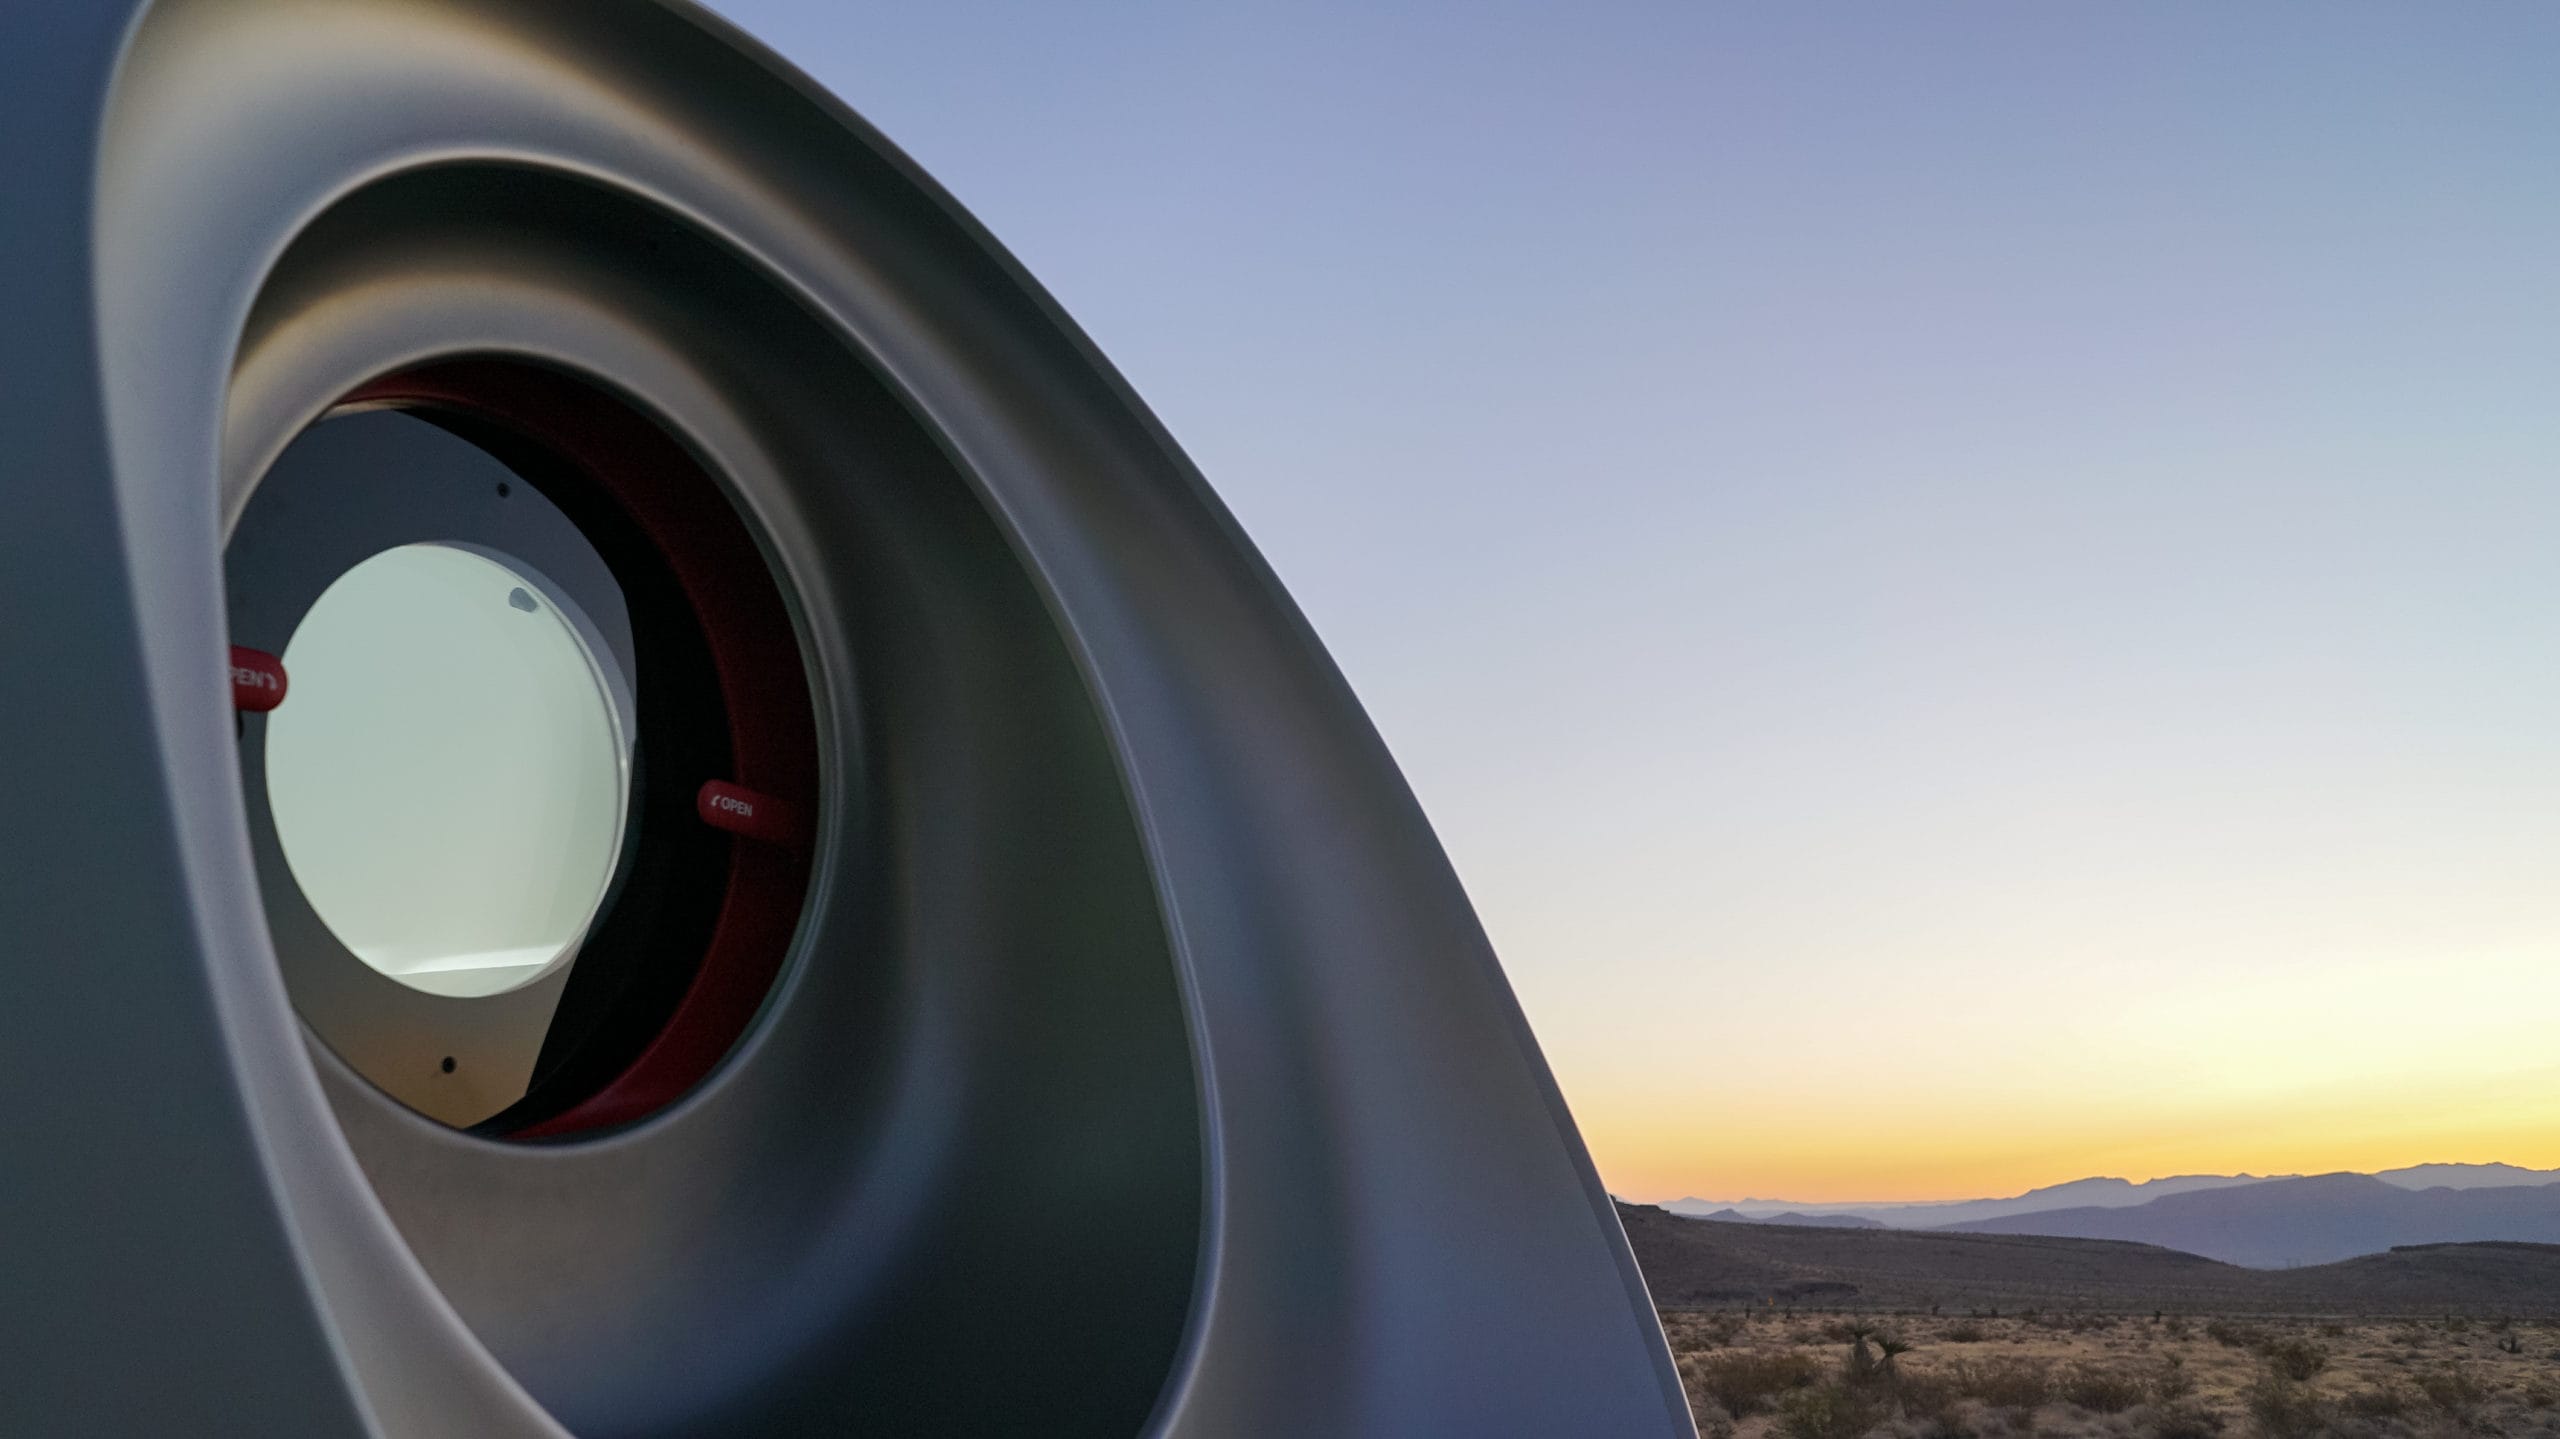 Virgin Hyperloop One Announces New Leadership Team to Support Commercialization and Implementation of World’s First Hyperloop System